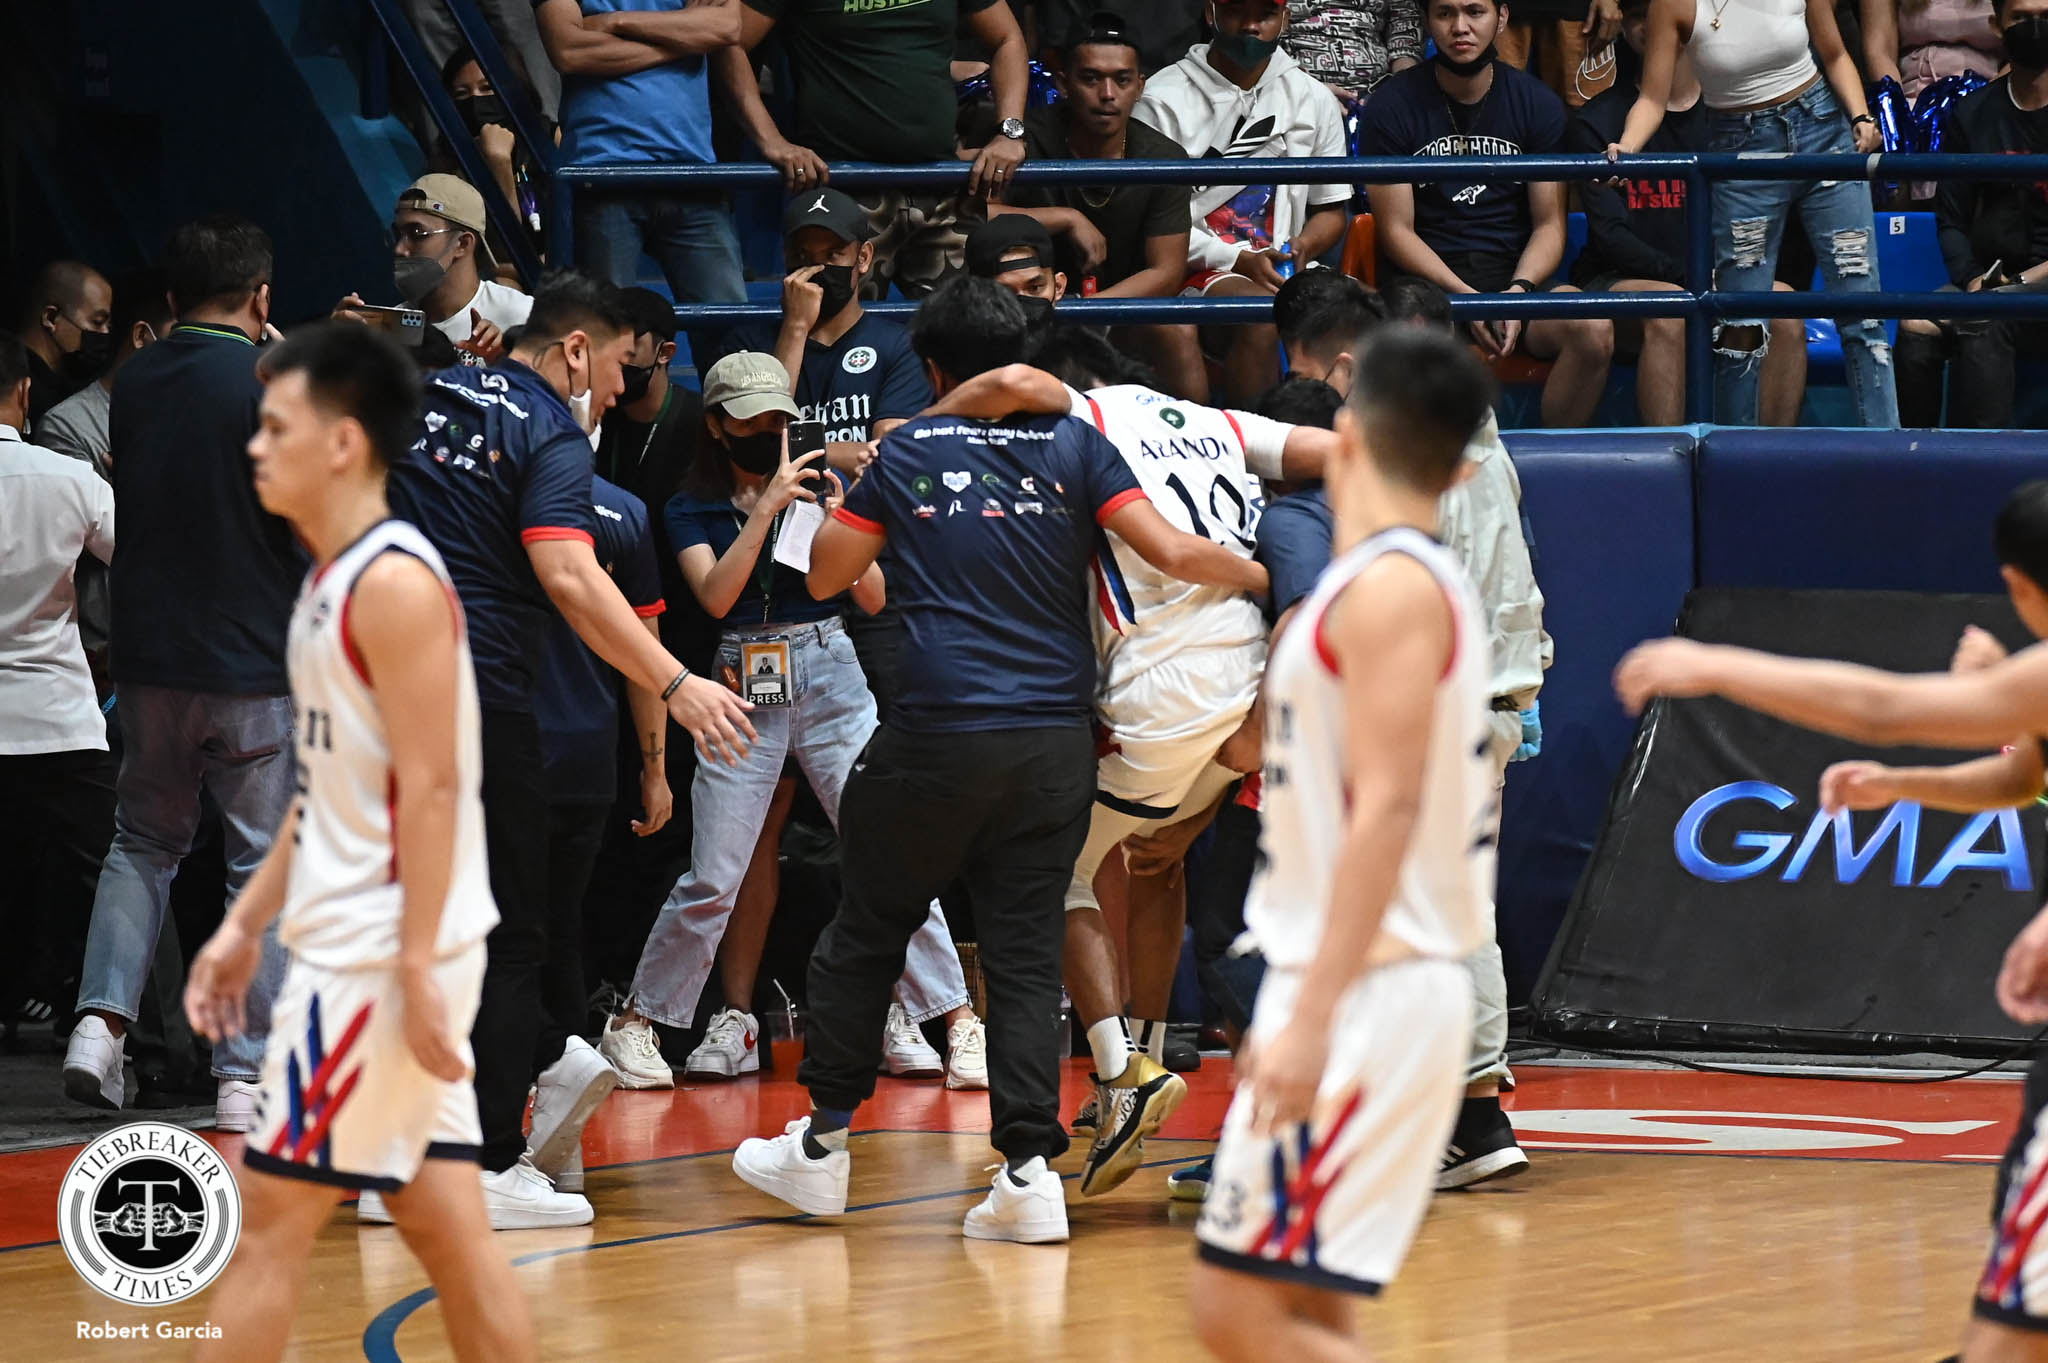 NCAA-97-CSJL-vs-MU-Abando Rhenz Abando relieved as ankle injury is nothing serious Basketball CSJL NCAA News  - philippine sports news